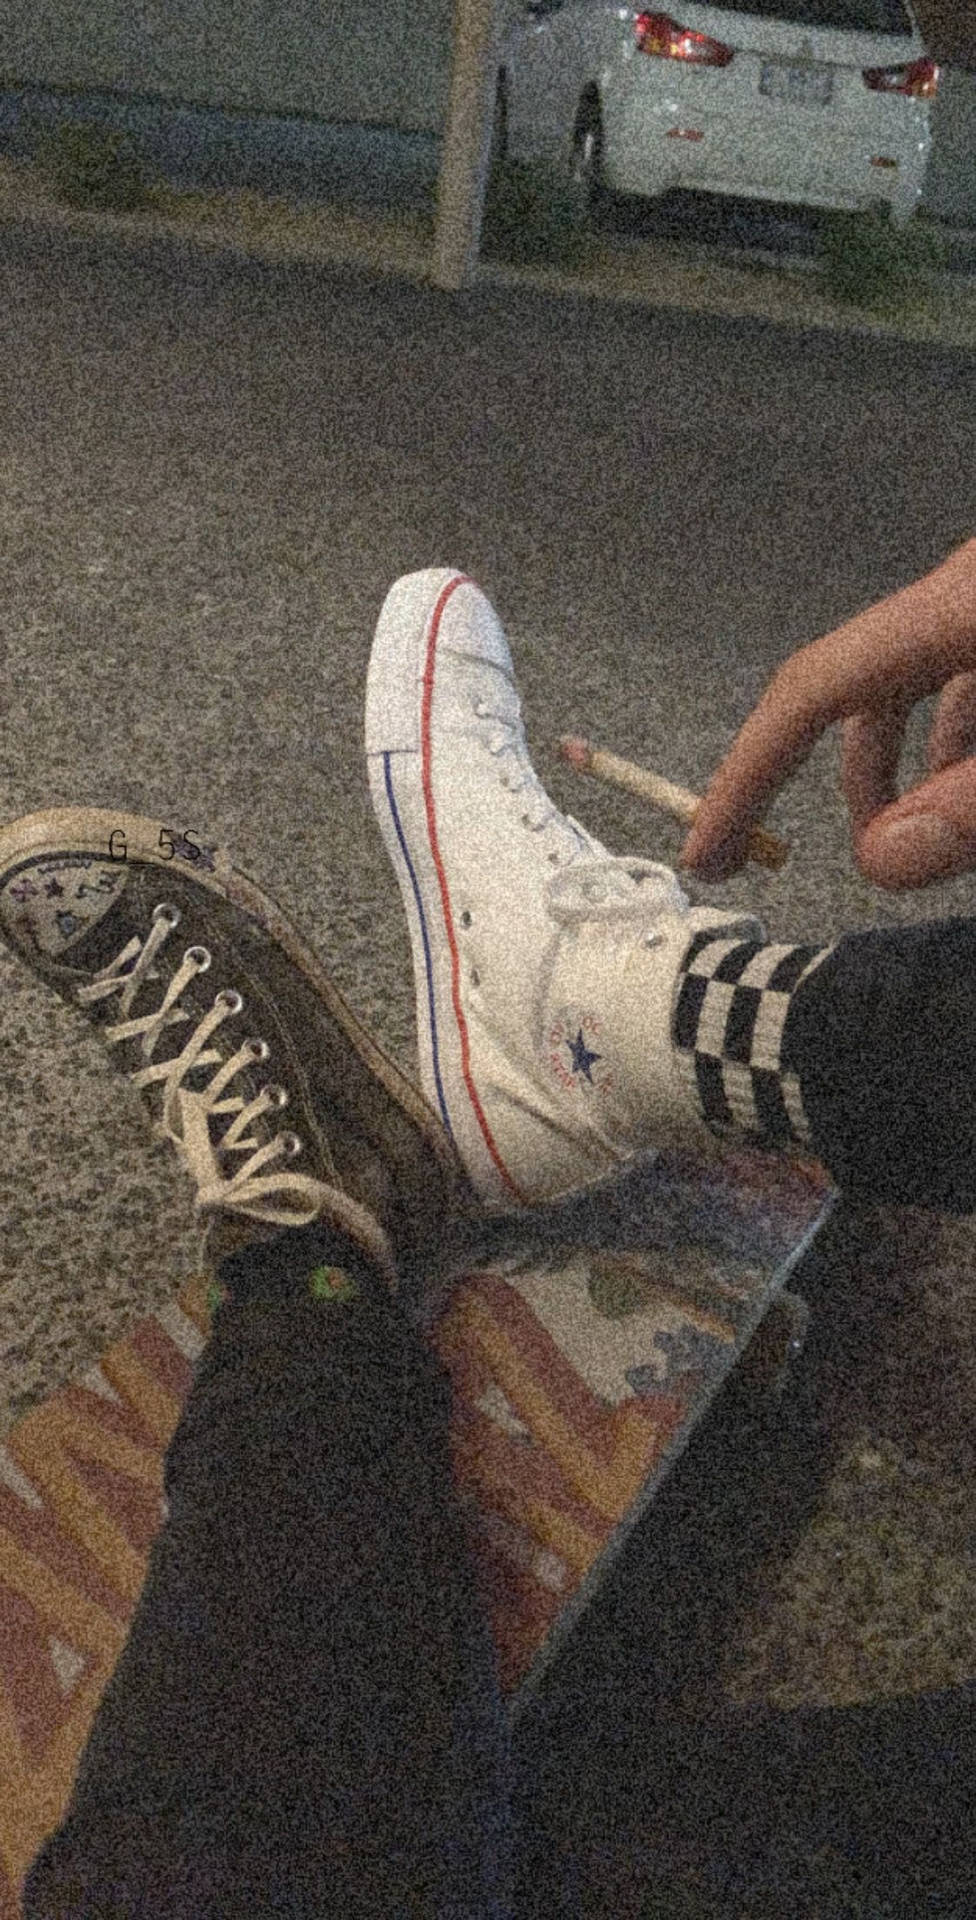 Mismatched Converse Shoes Grunge Style Skater Aesthetic Background